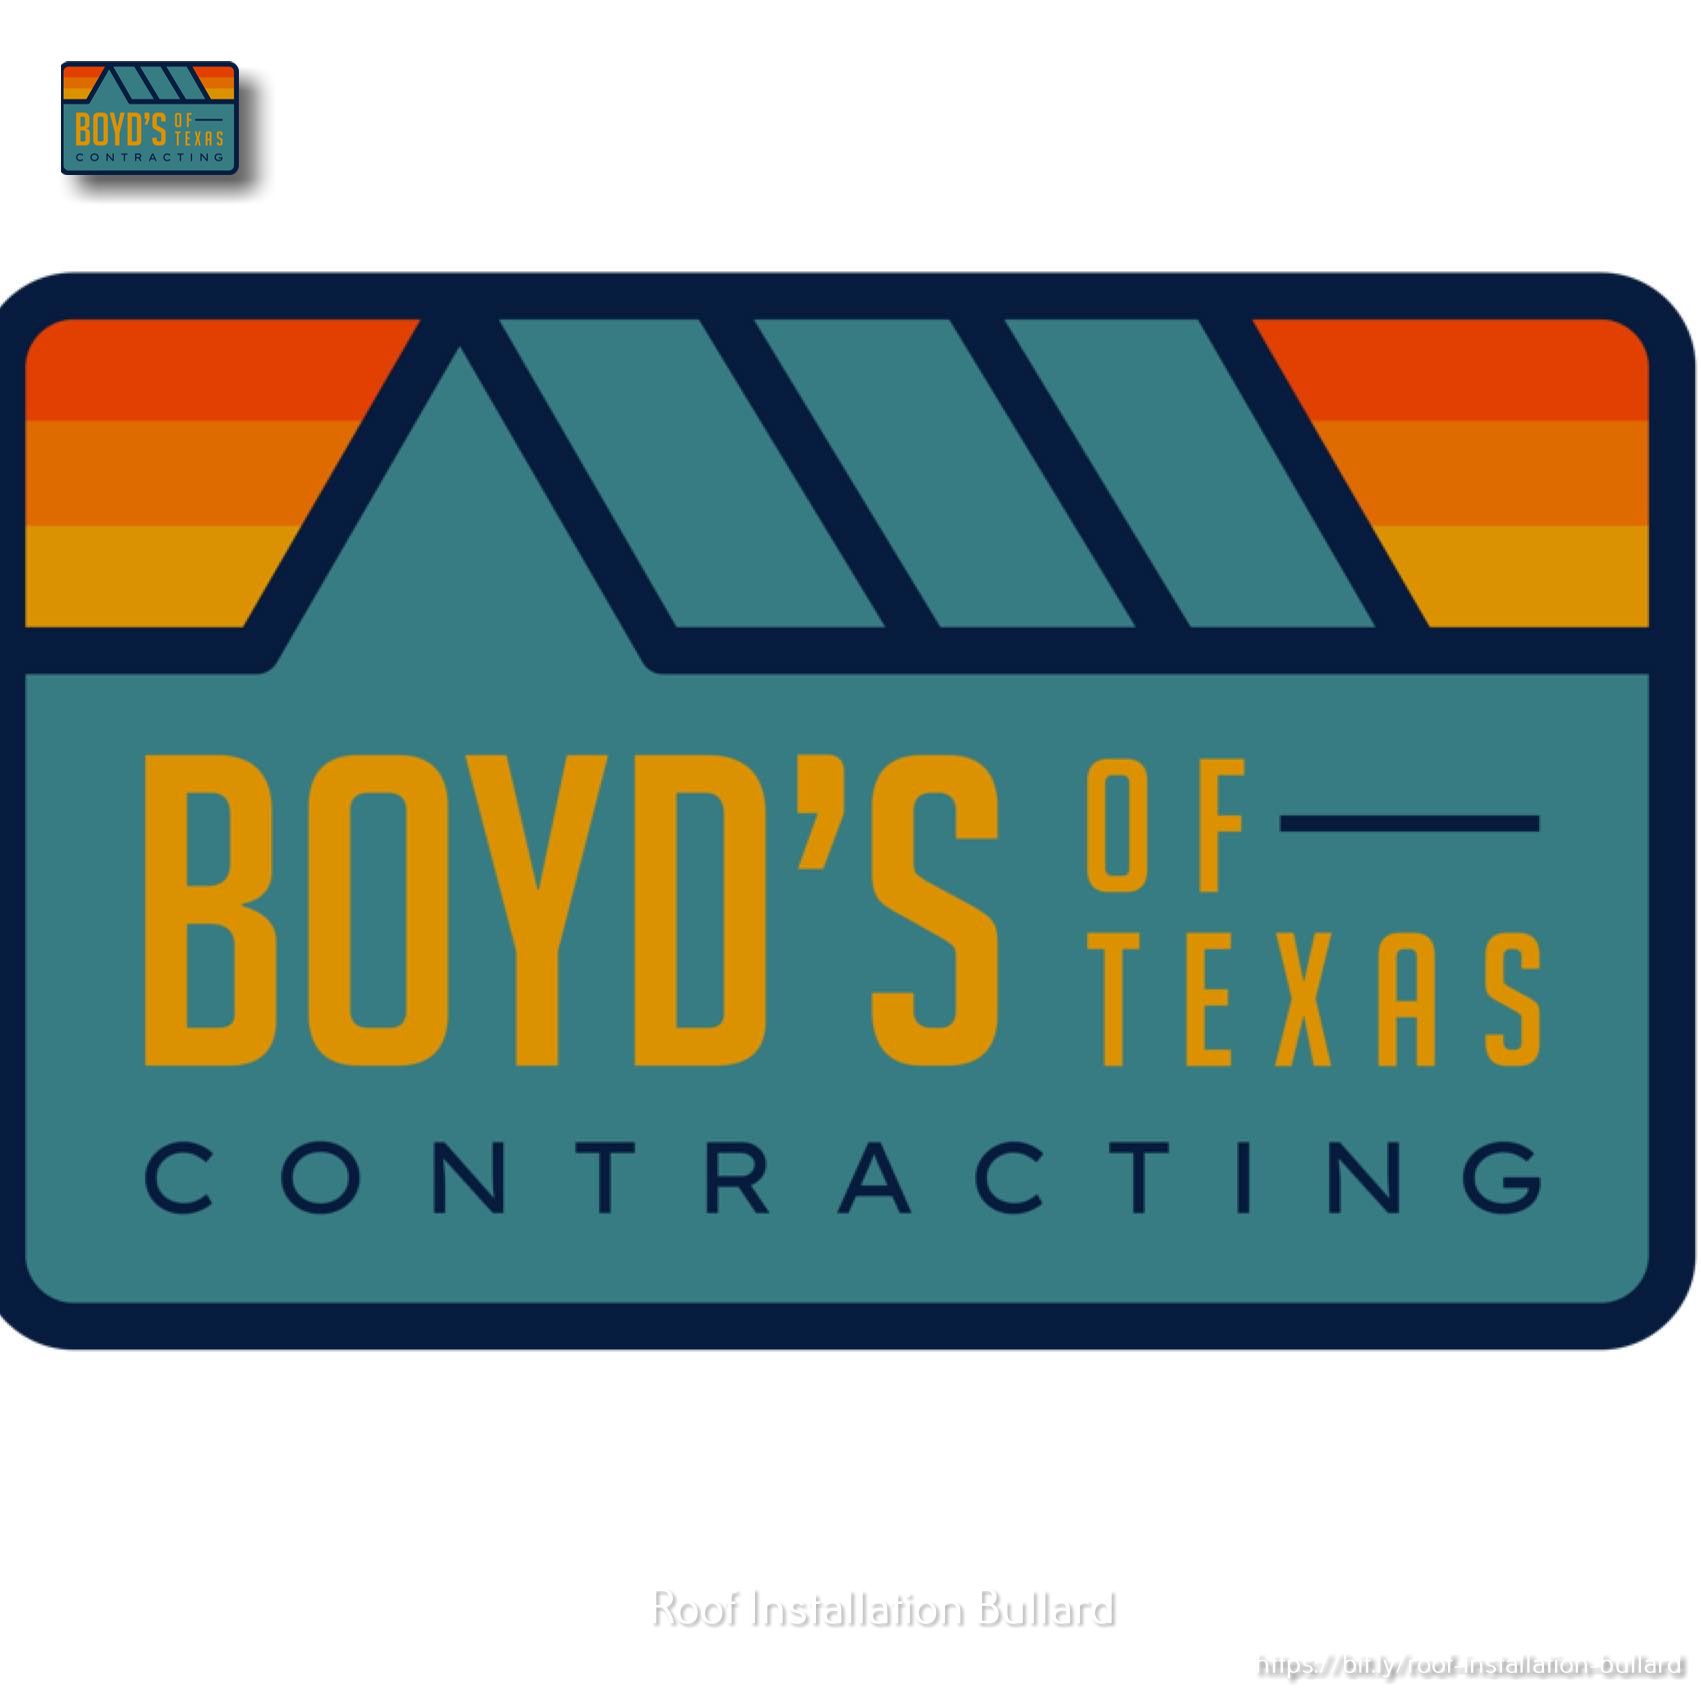 Boyd's of Texas Contracting